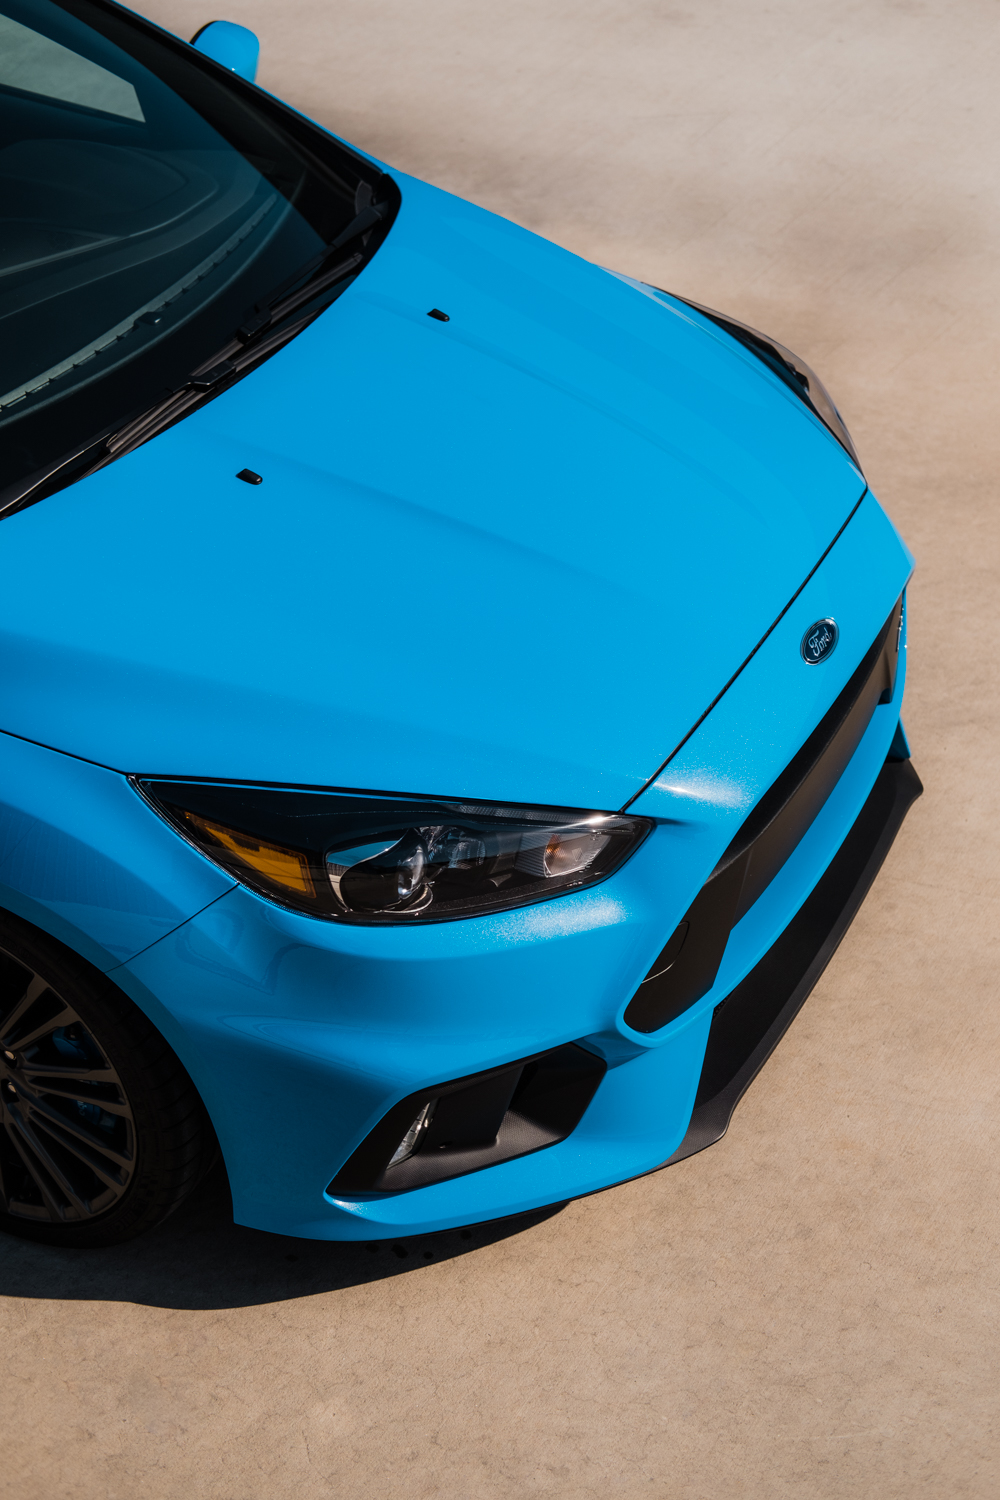 Ford Focus RS-XPEL Ultimate Paint Protection Film-Car Wash-Car Detailing-Paint Protection Film-Clear Bra-Ford Performance-121.jpg